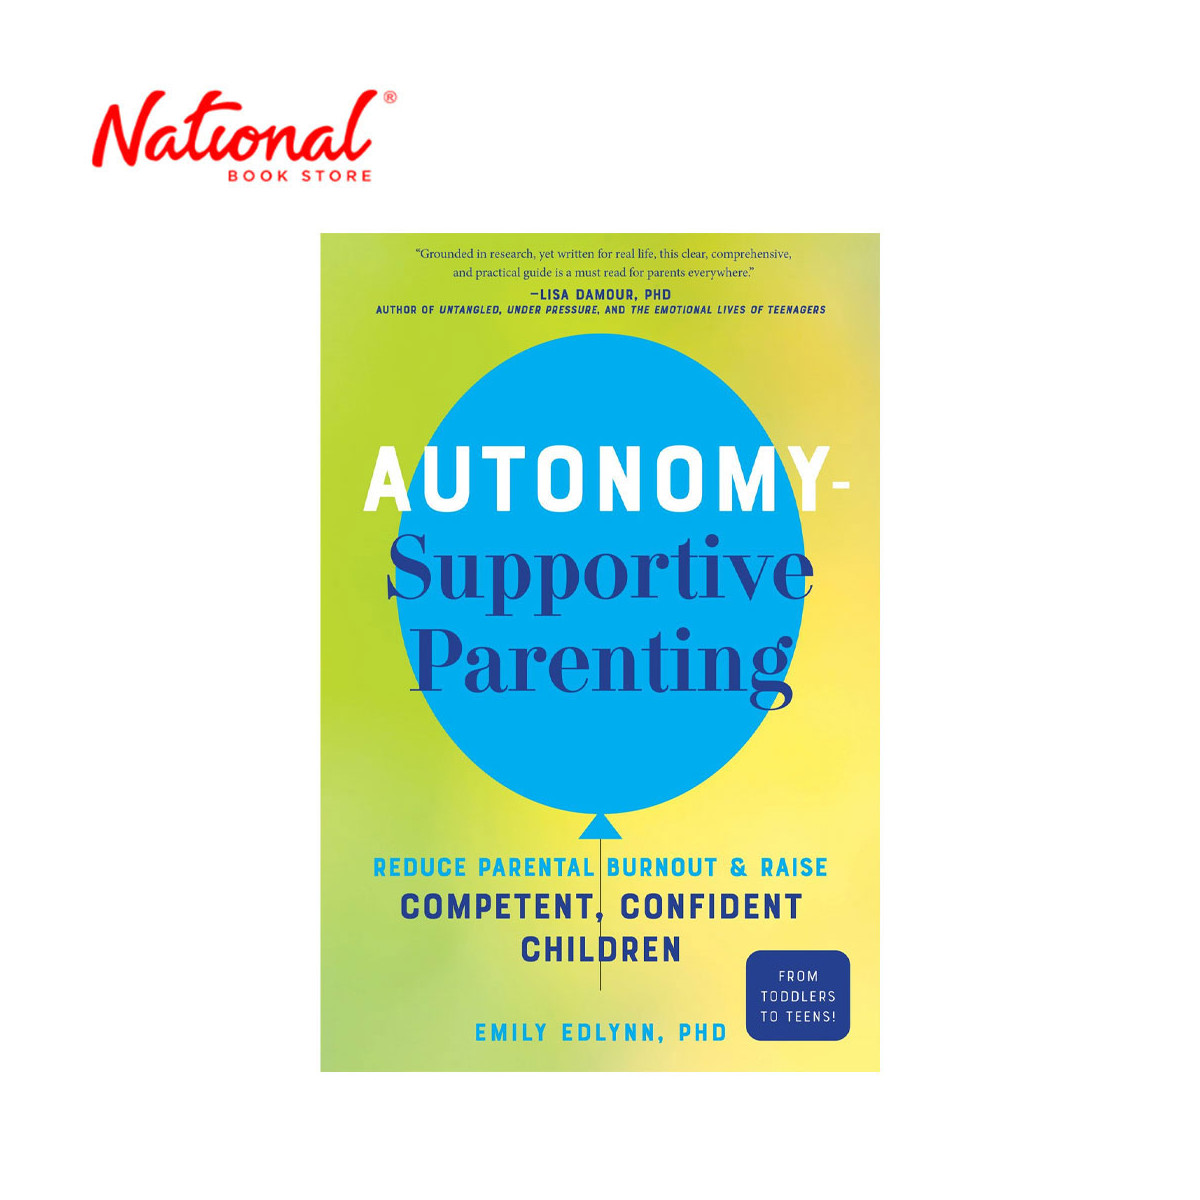 Autonomy-Supportive Parenting by Emily Edlynn - Trade Paperback - Health & Fitness